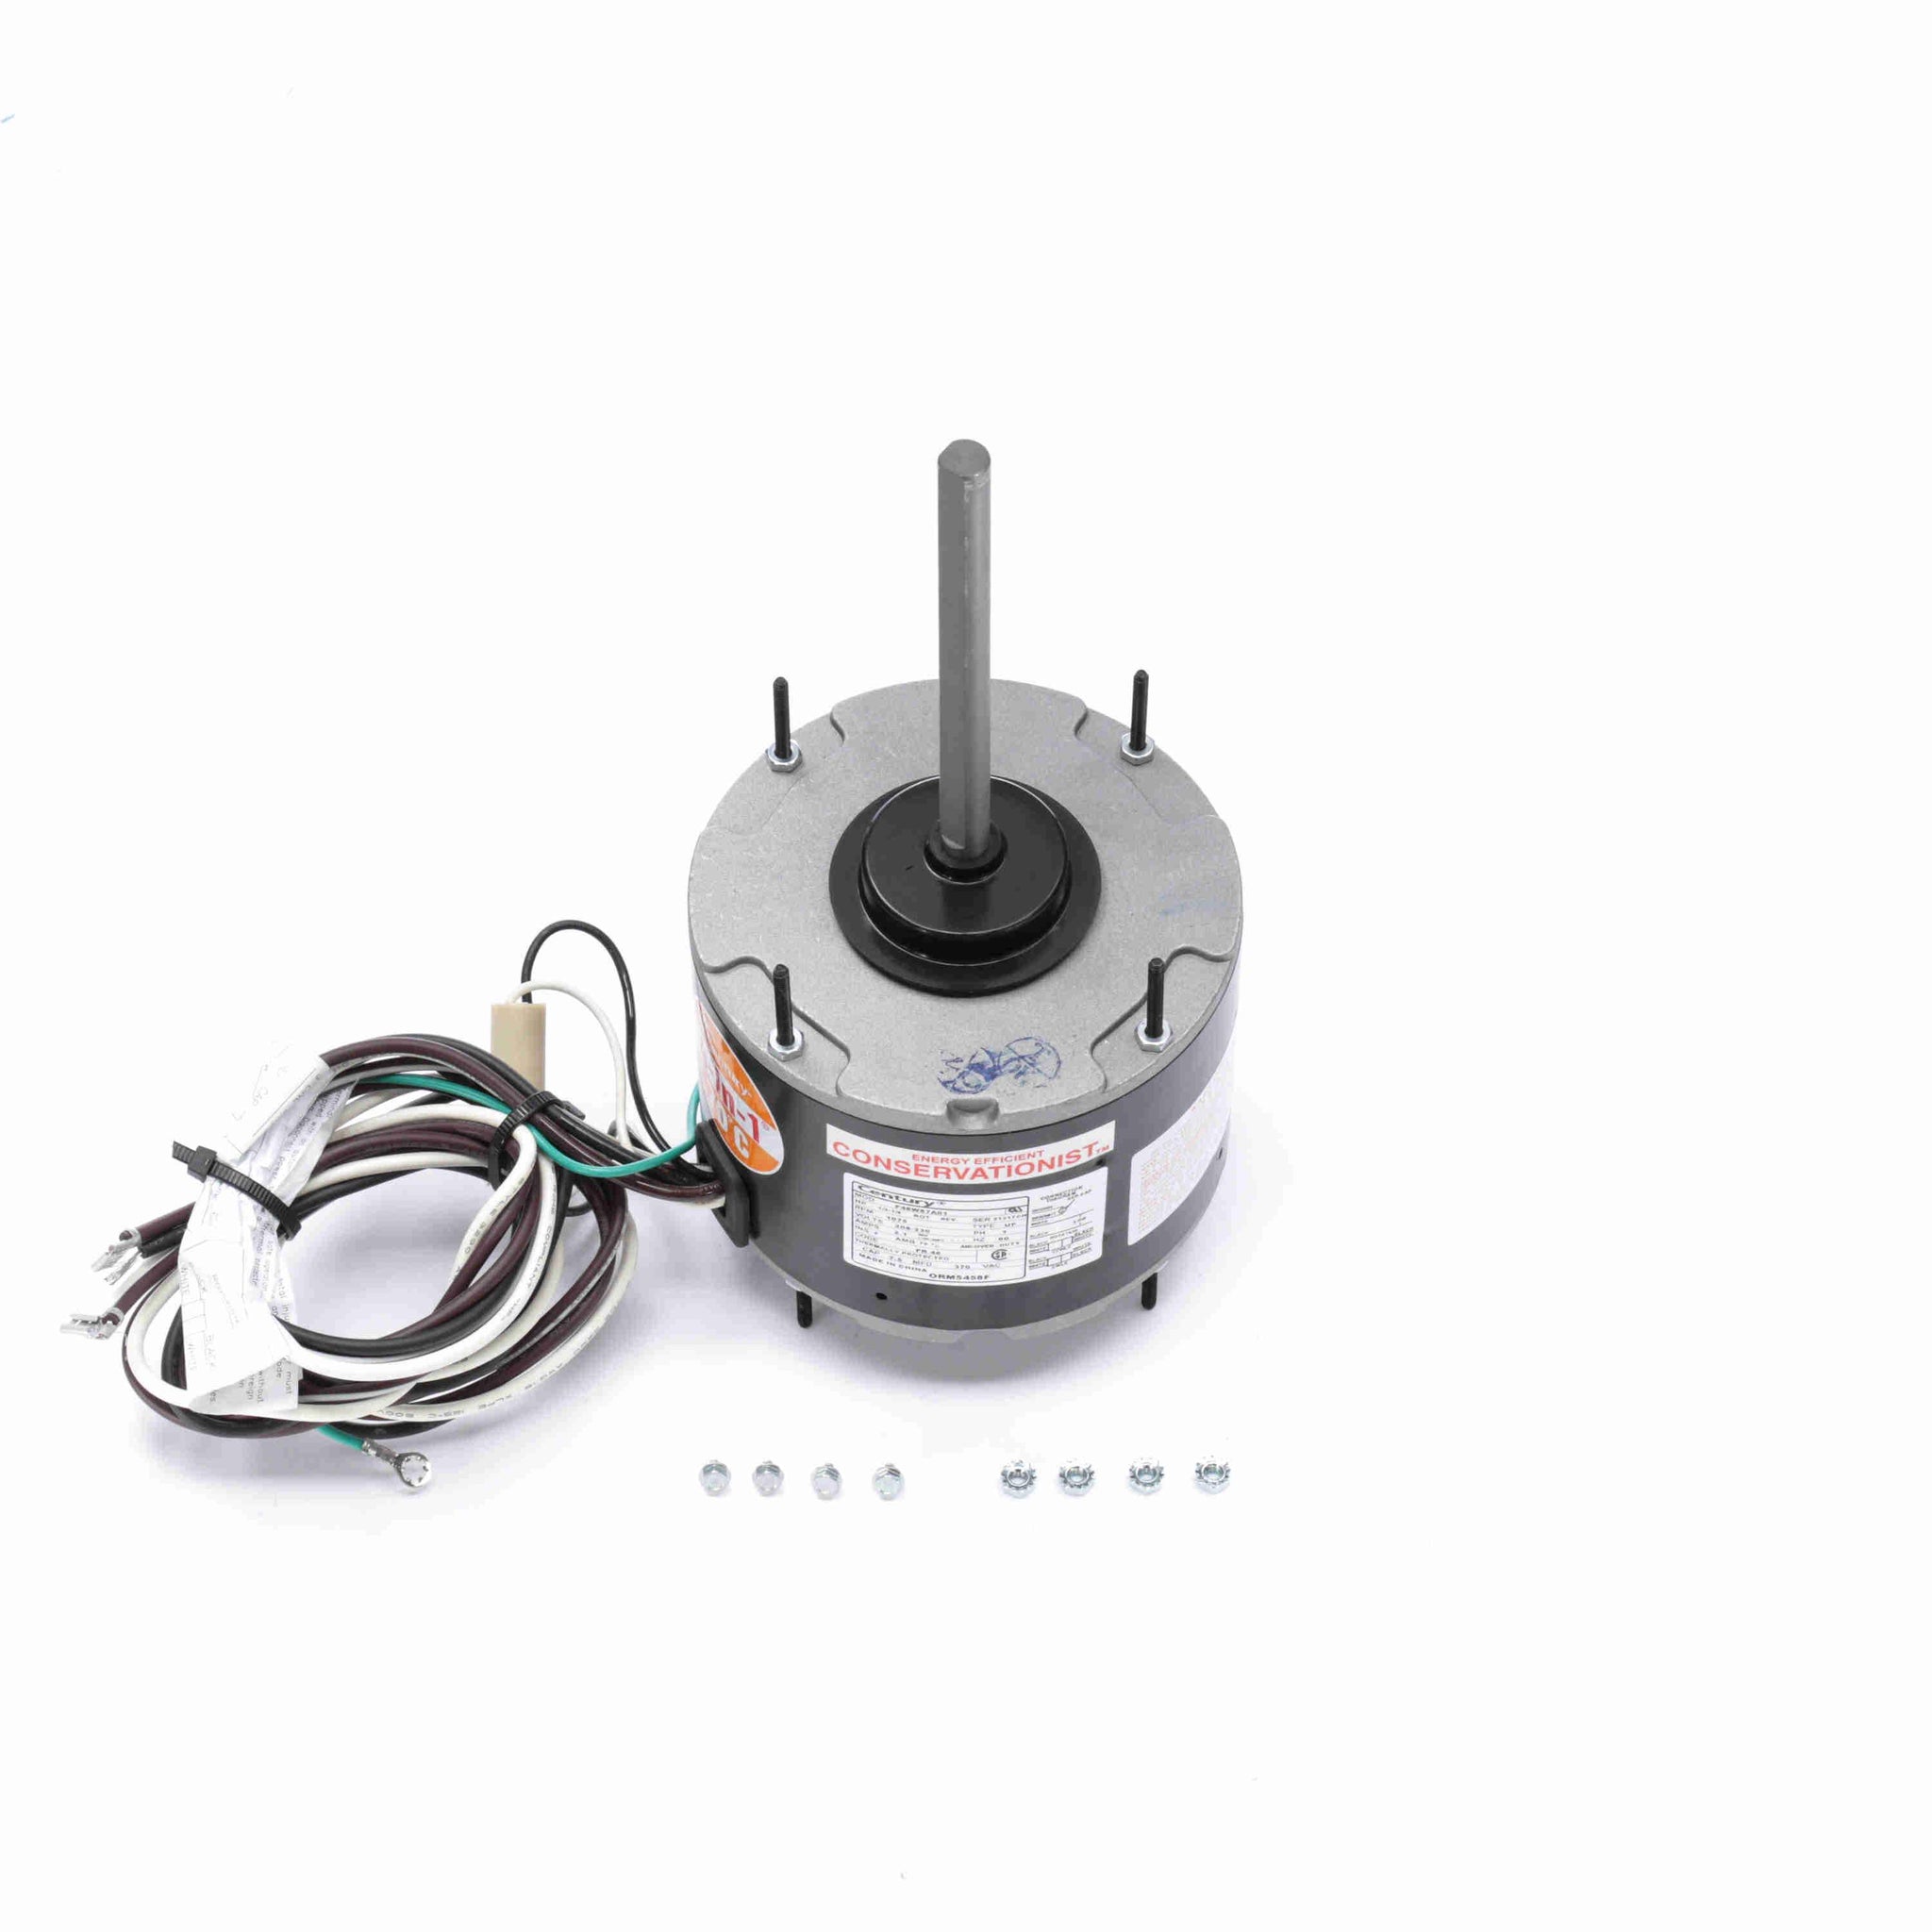 ORM5458F - 1/3-1/6 HP Condenser Fan Motor, 1075 RPM, 1 Speed, 208-230 Volts, 48 Frame, TEAO - Hardware & Moreee